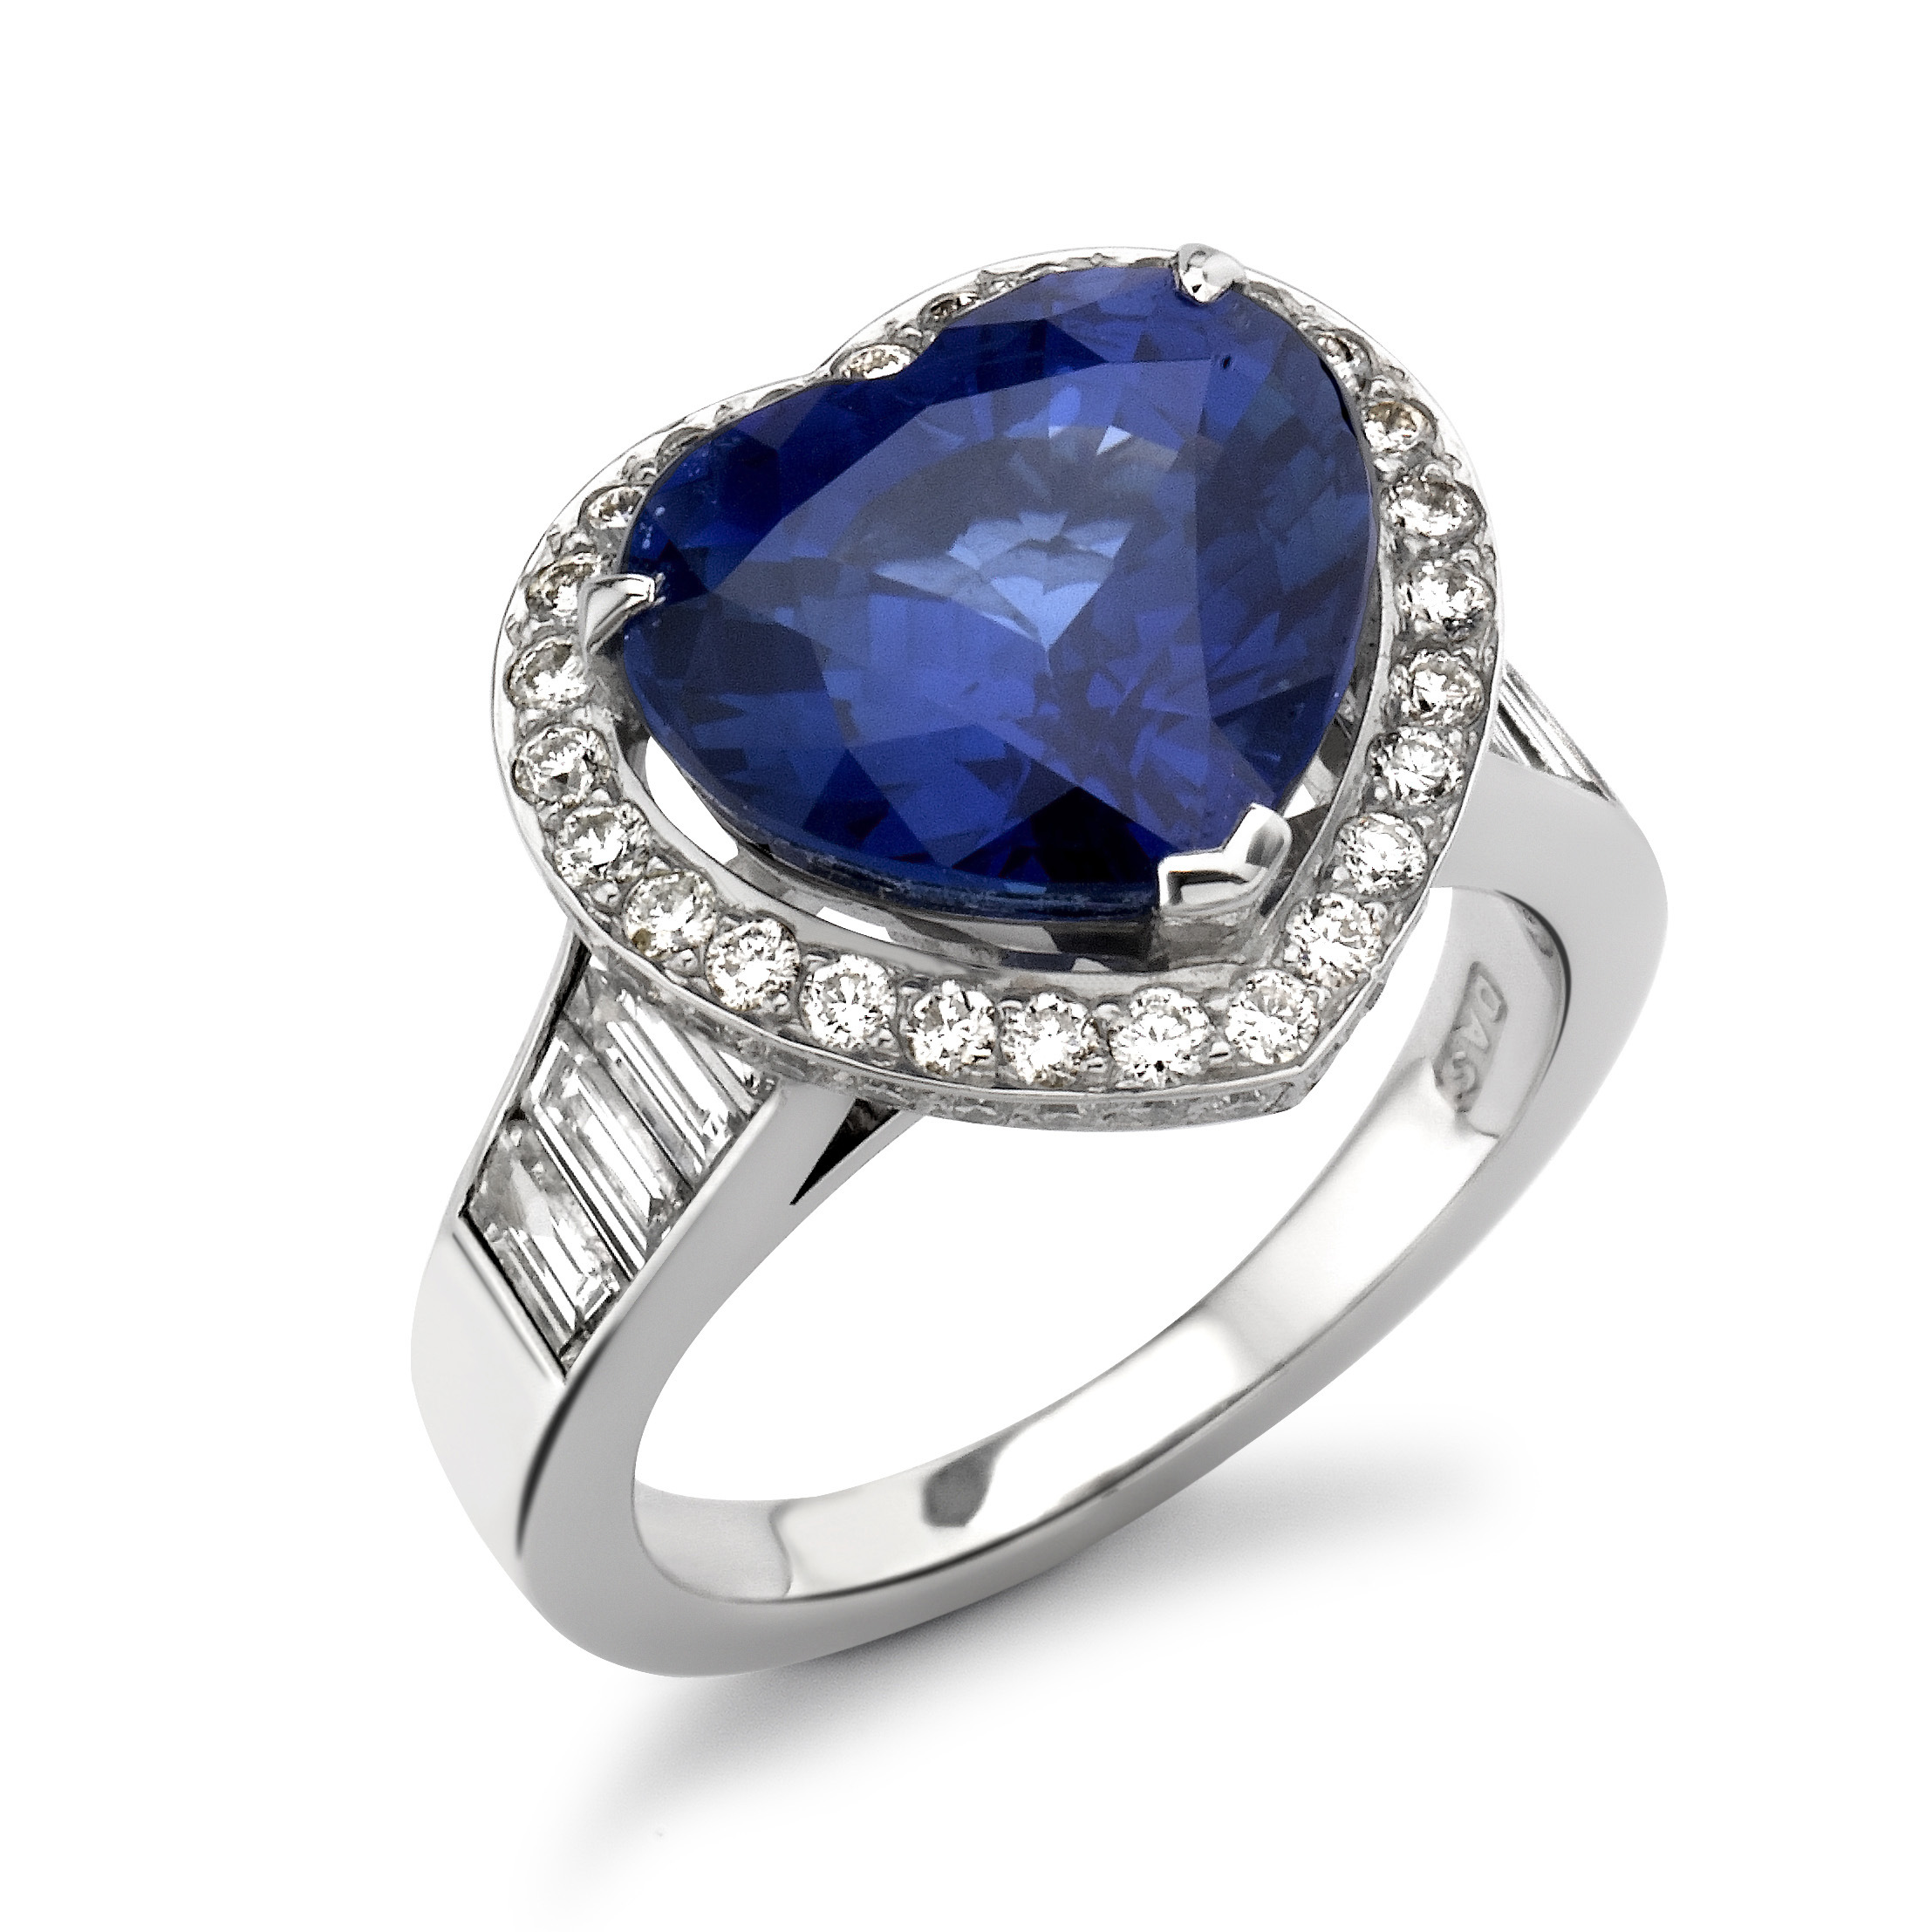 Platinum Ring with Sapphire stone & a pave set diamond trail by Da Soley